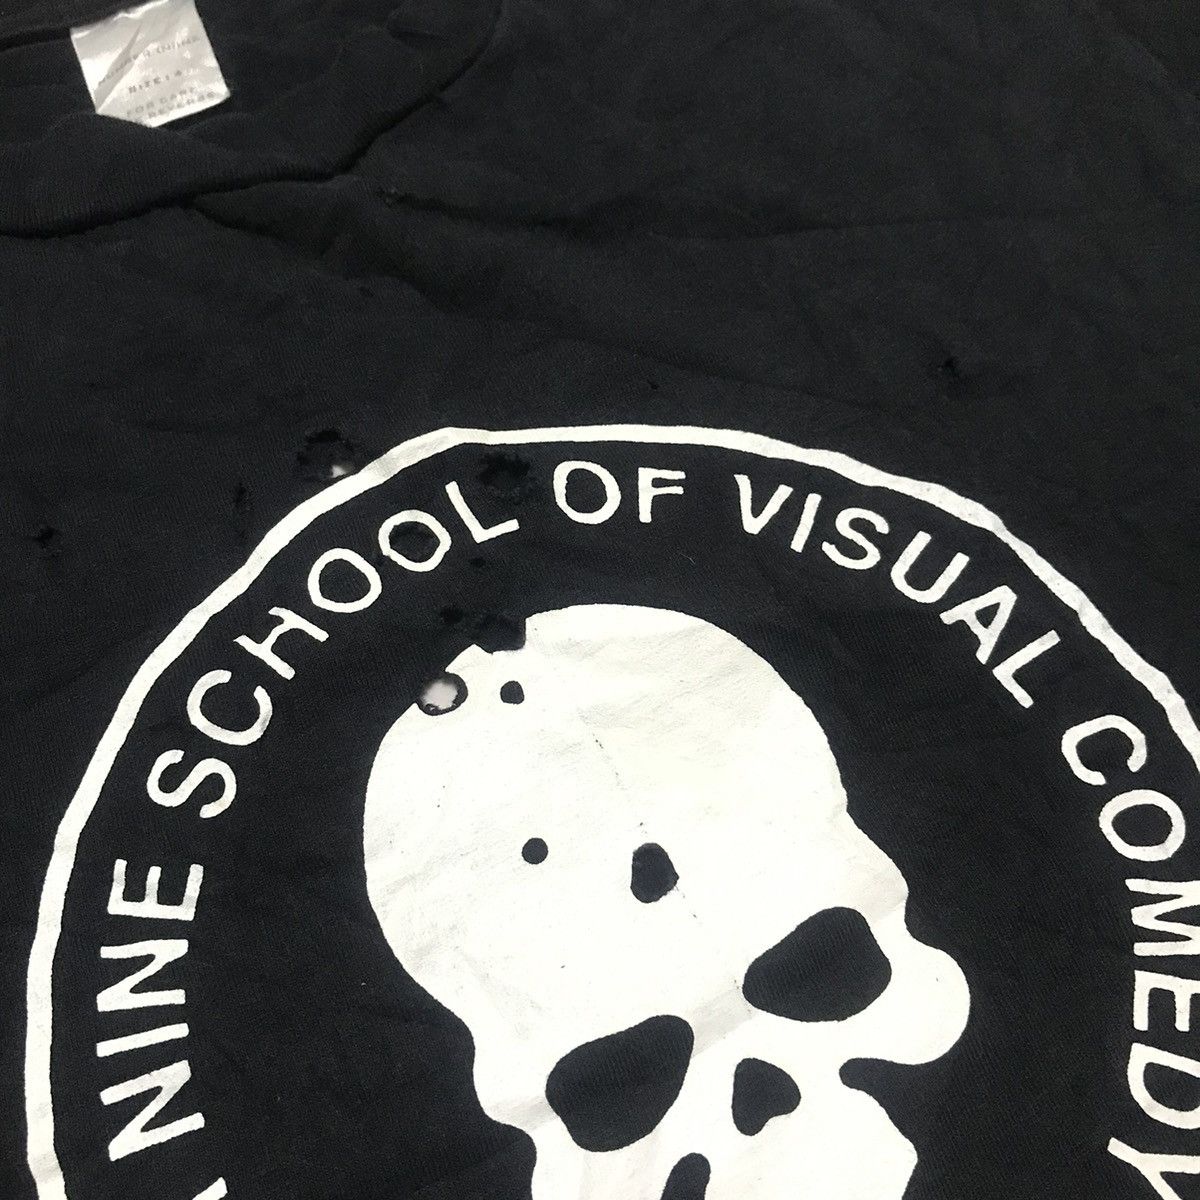 SS01 Number Nine school of visual comedy distressed T shirt - 5